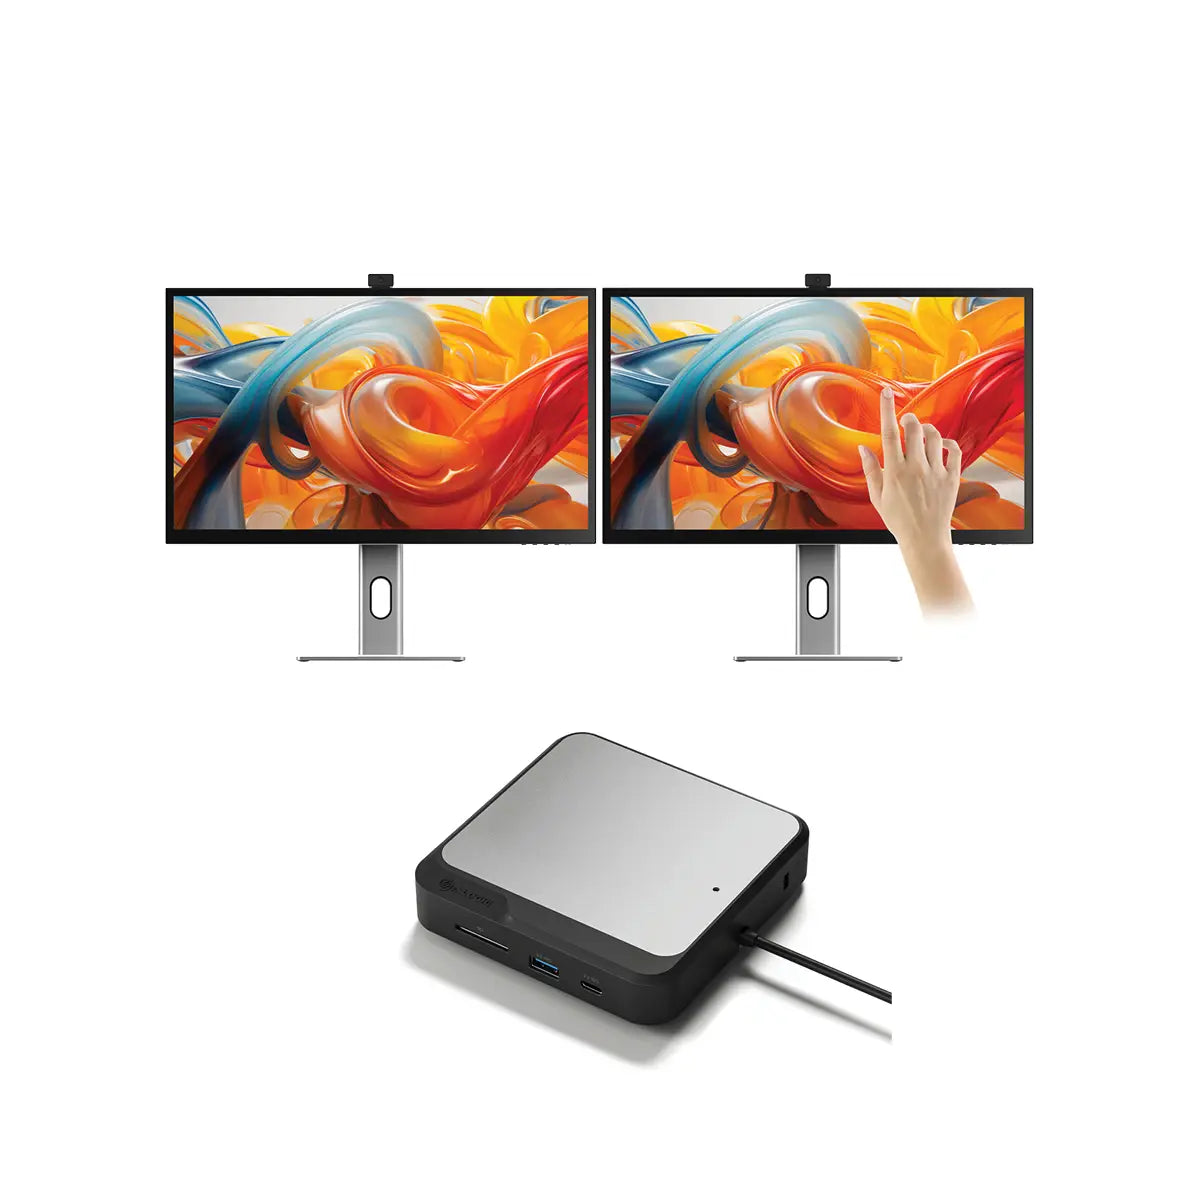 clarity-pro-touch-27-uhd-4k-monitor-with-65w-pd-webcam-and-touchscreen-pack-of-2-dual-4k-universal-docking-station-hdmi-edition_1